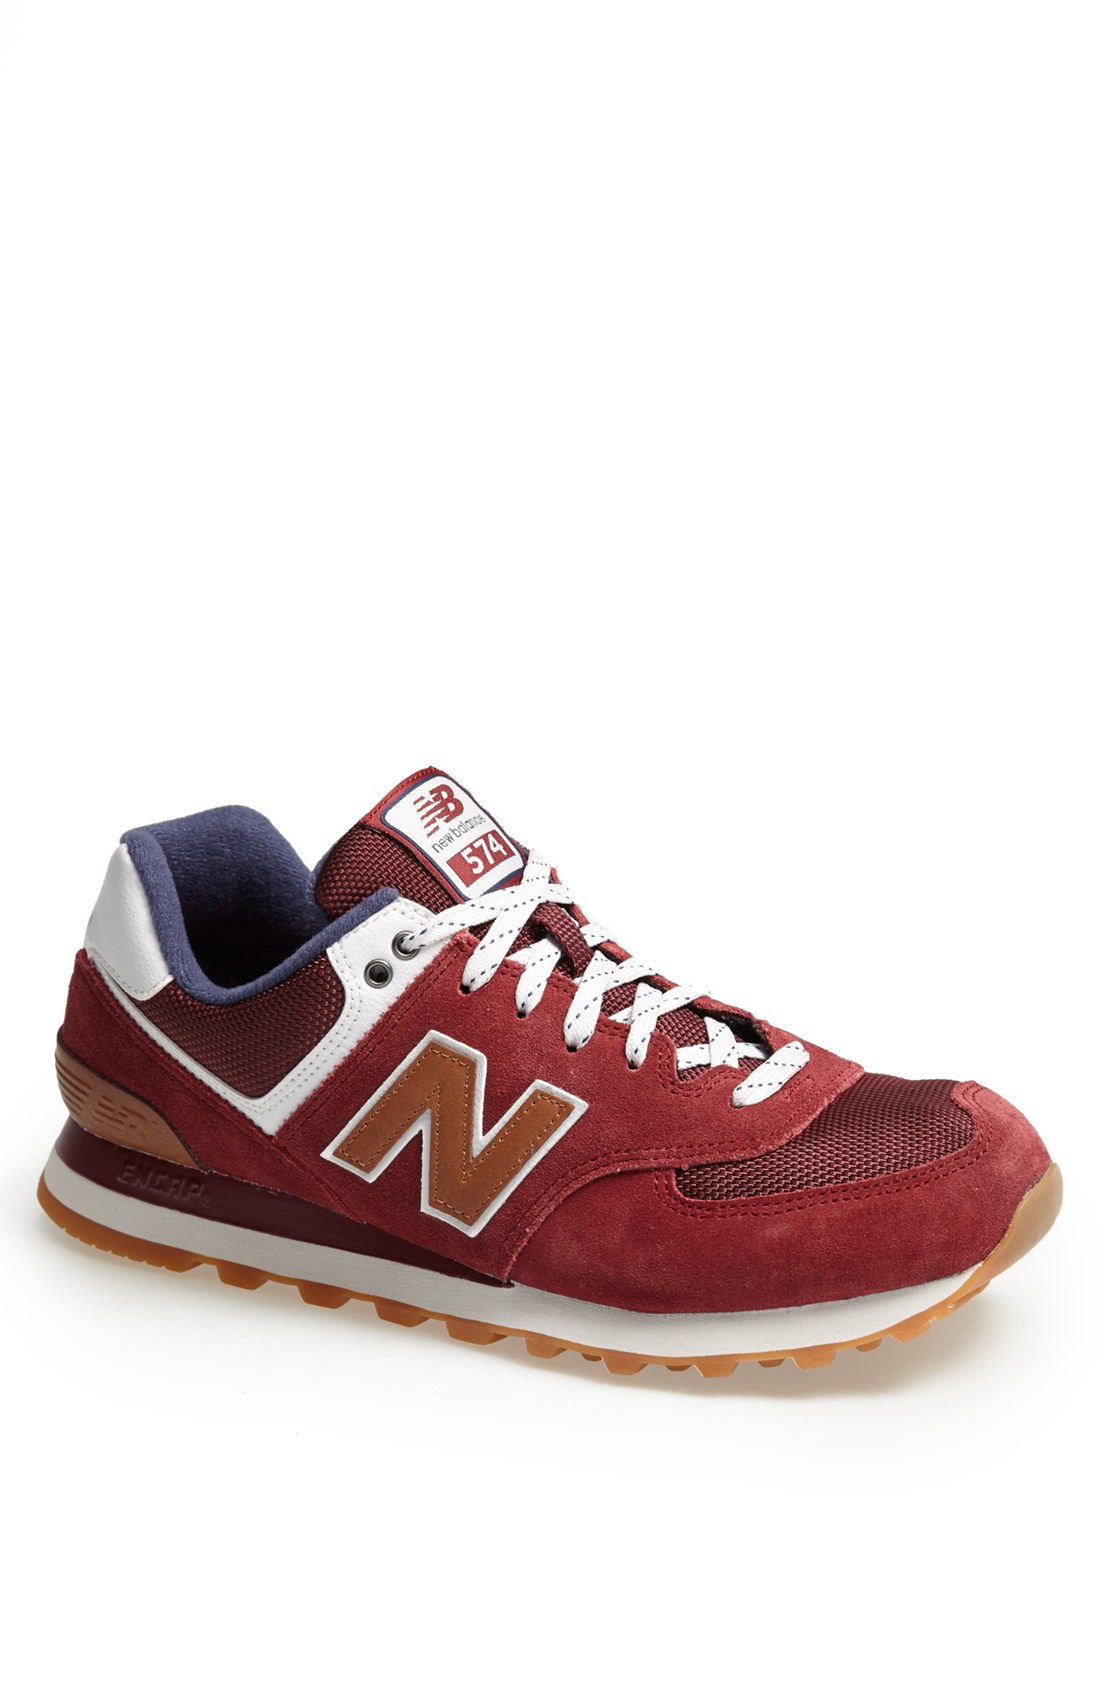 New Balance Canteen Collection 574 Sneaker in Red for Men (Burgundy) | Lyst